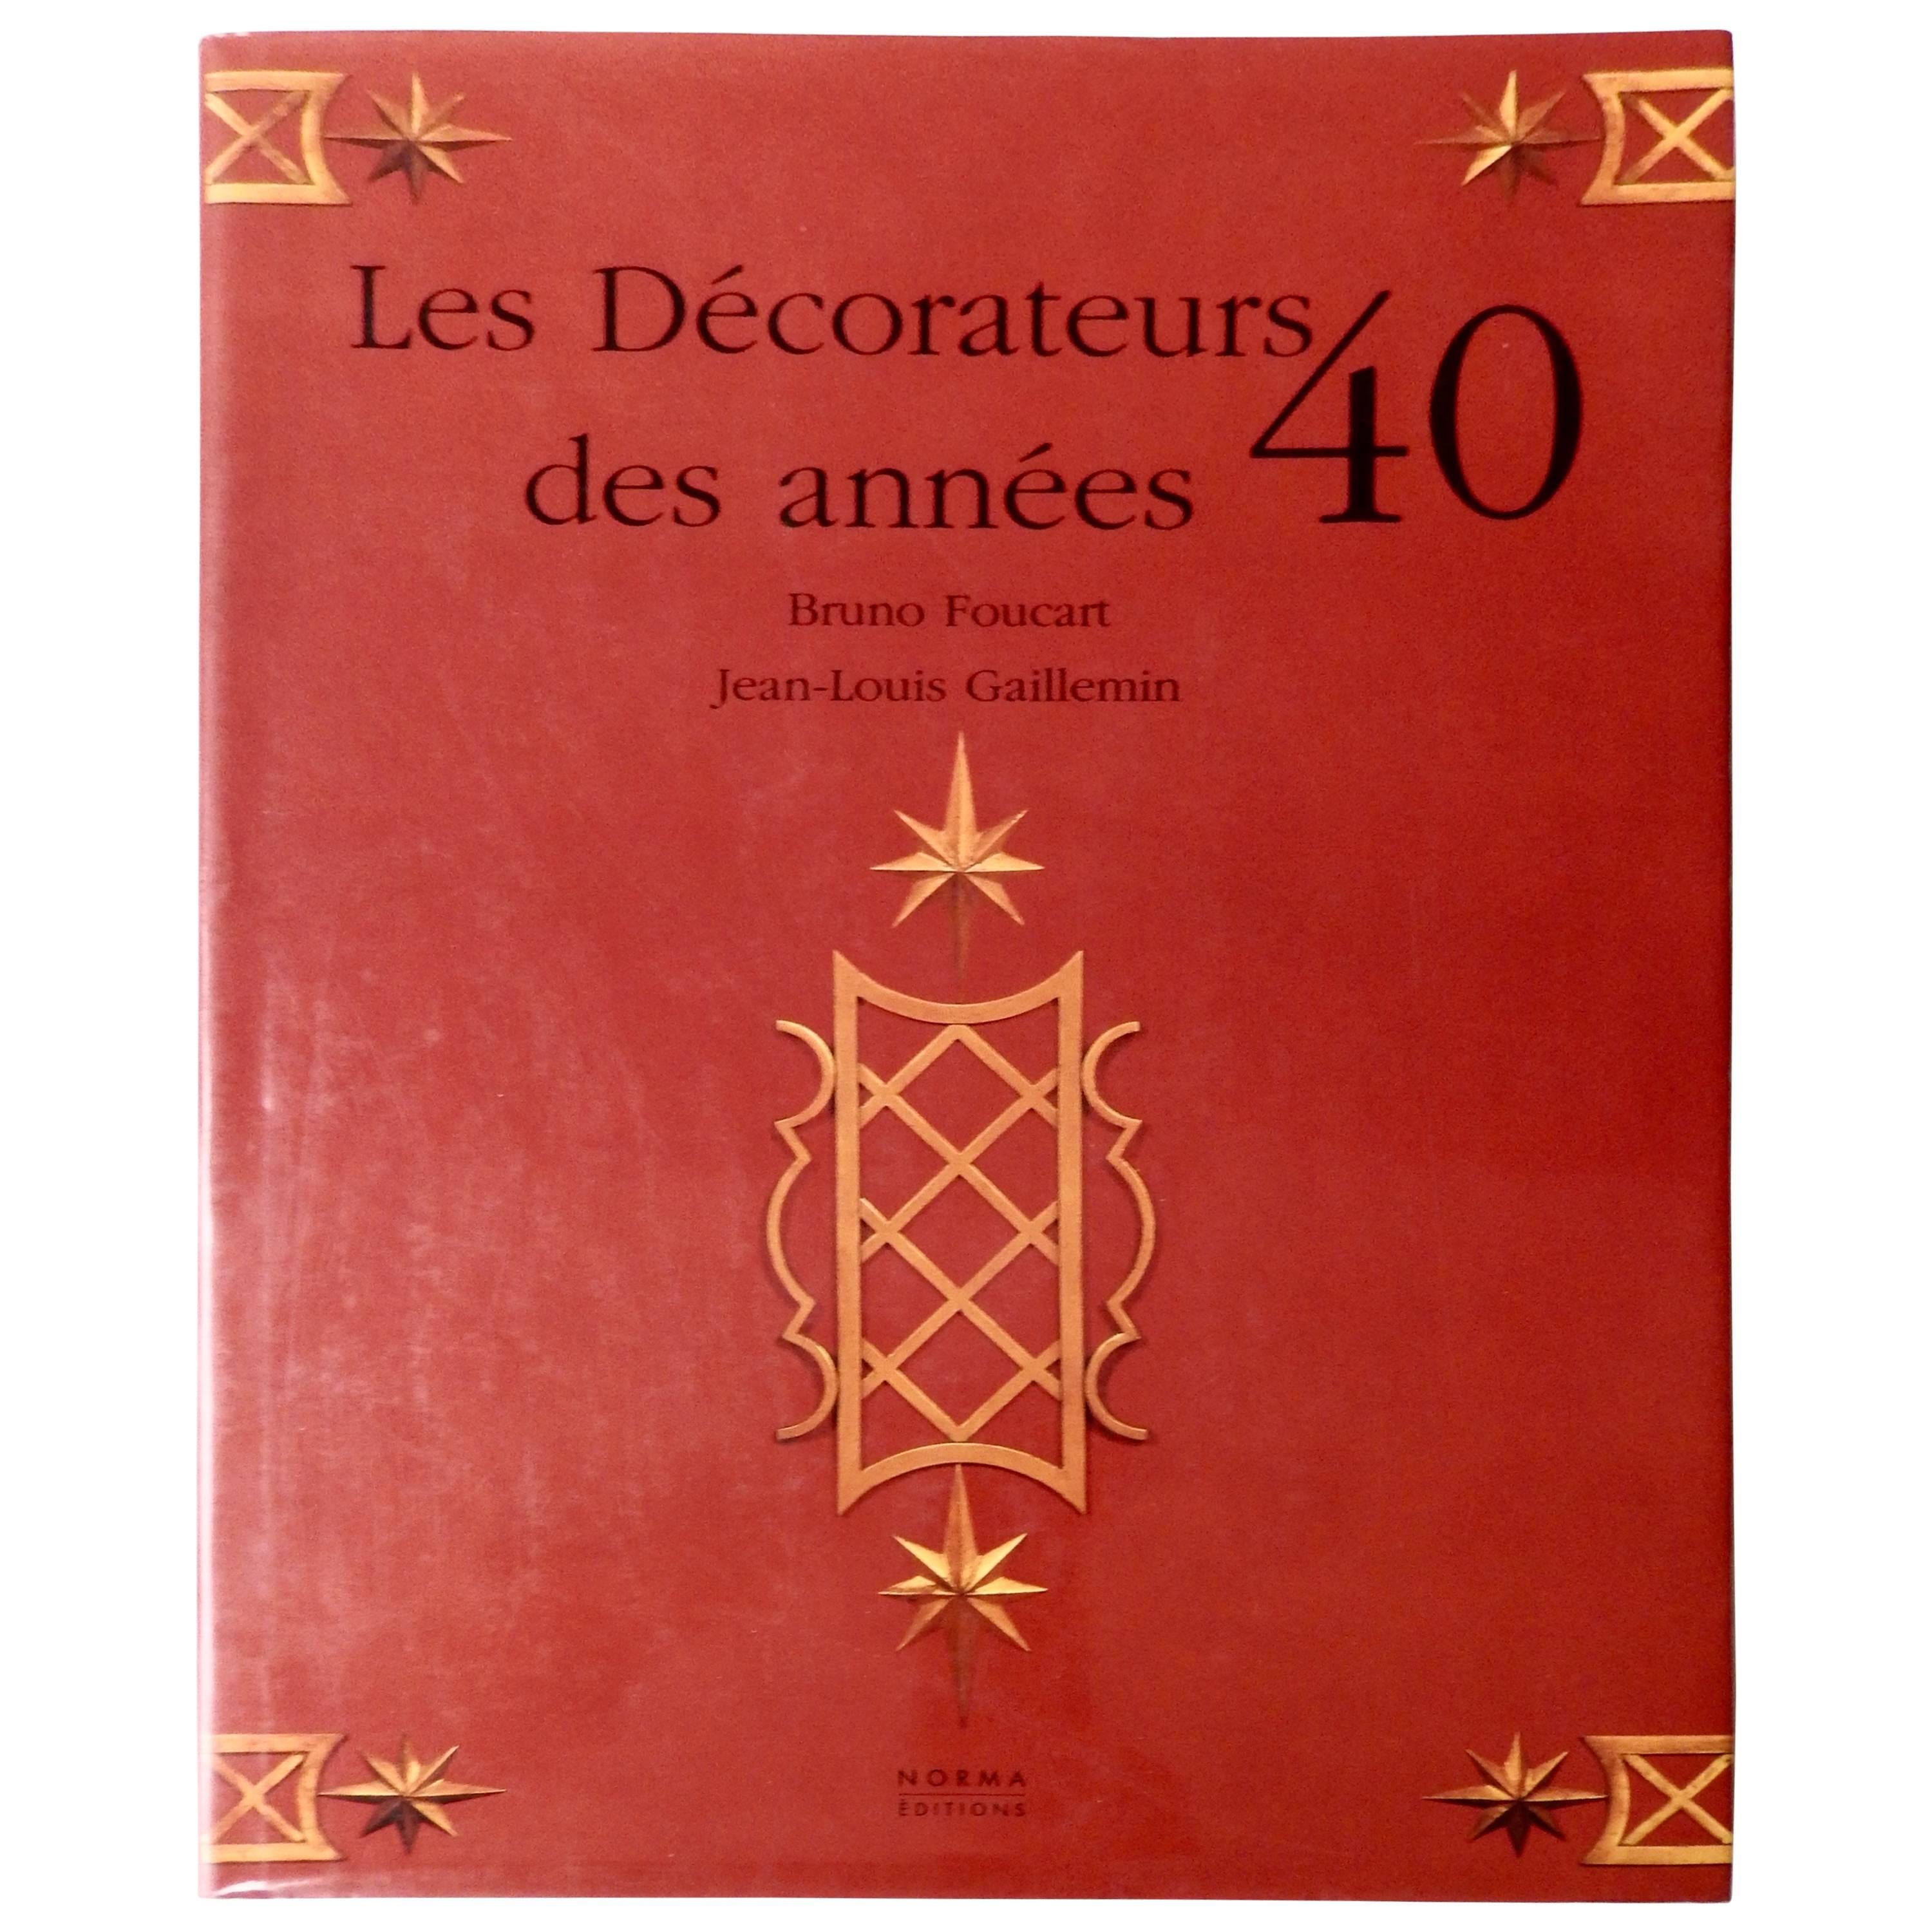 Reference Book on French 1940s Design "Les Decorateurs des Annees 40" For Sale